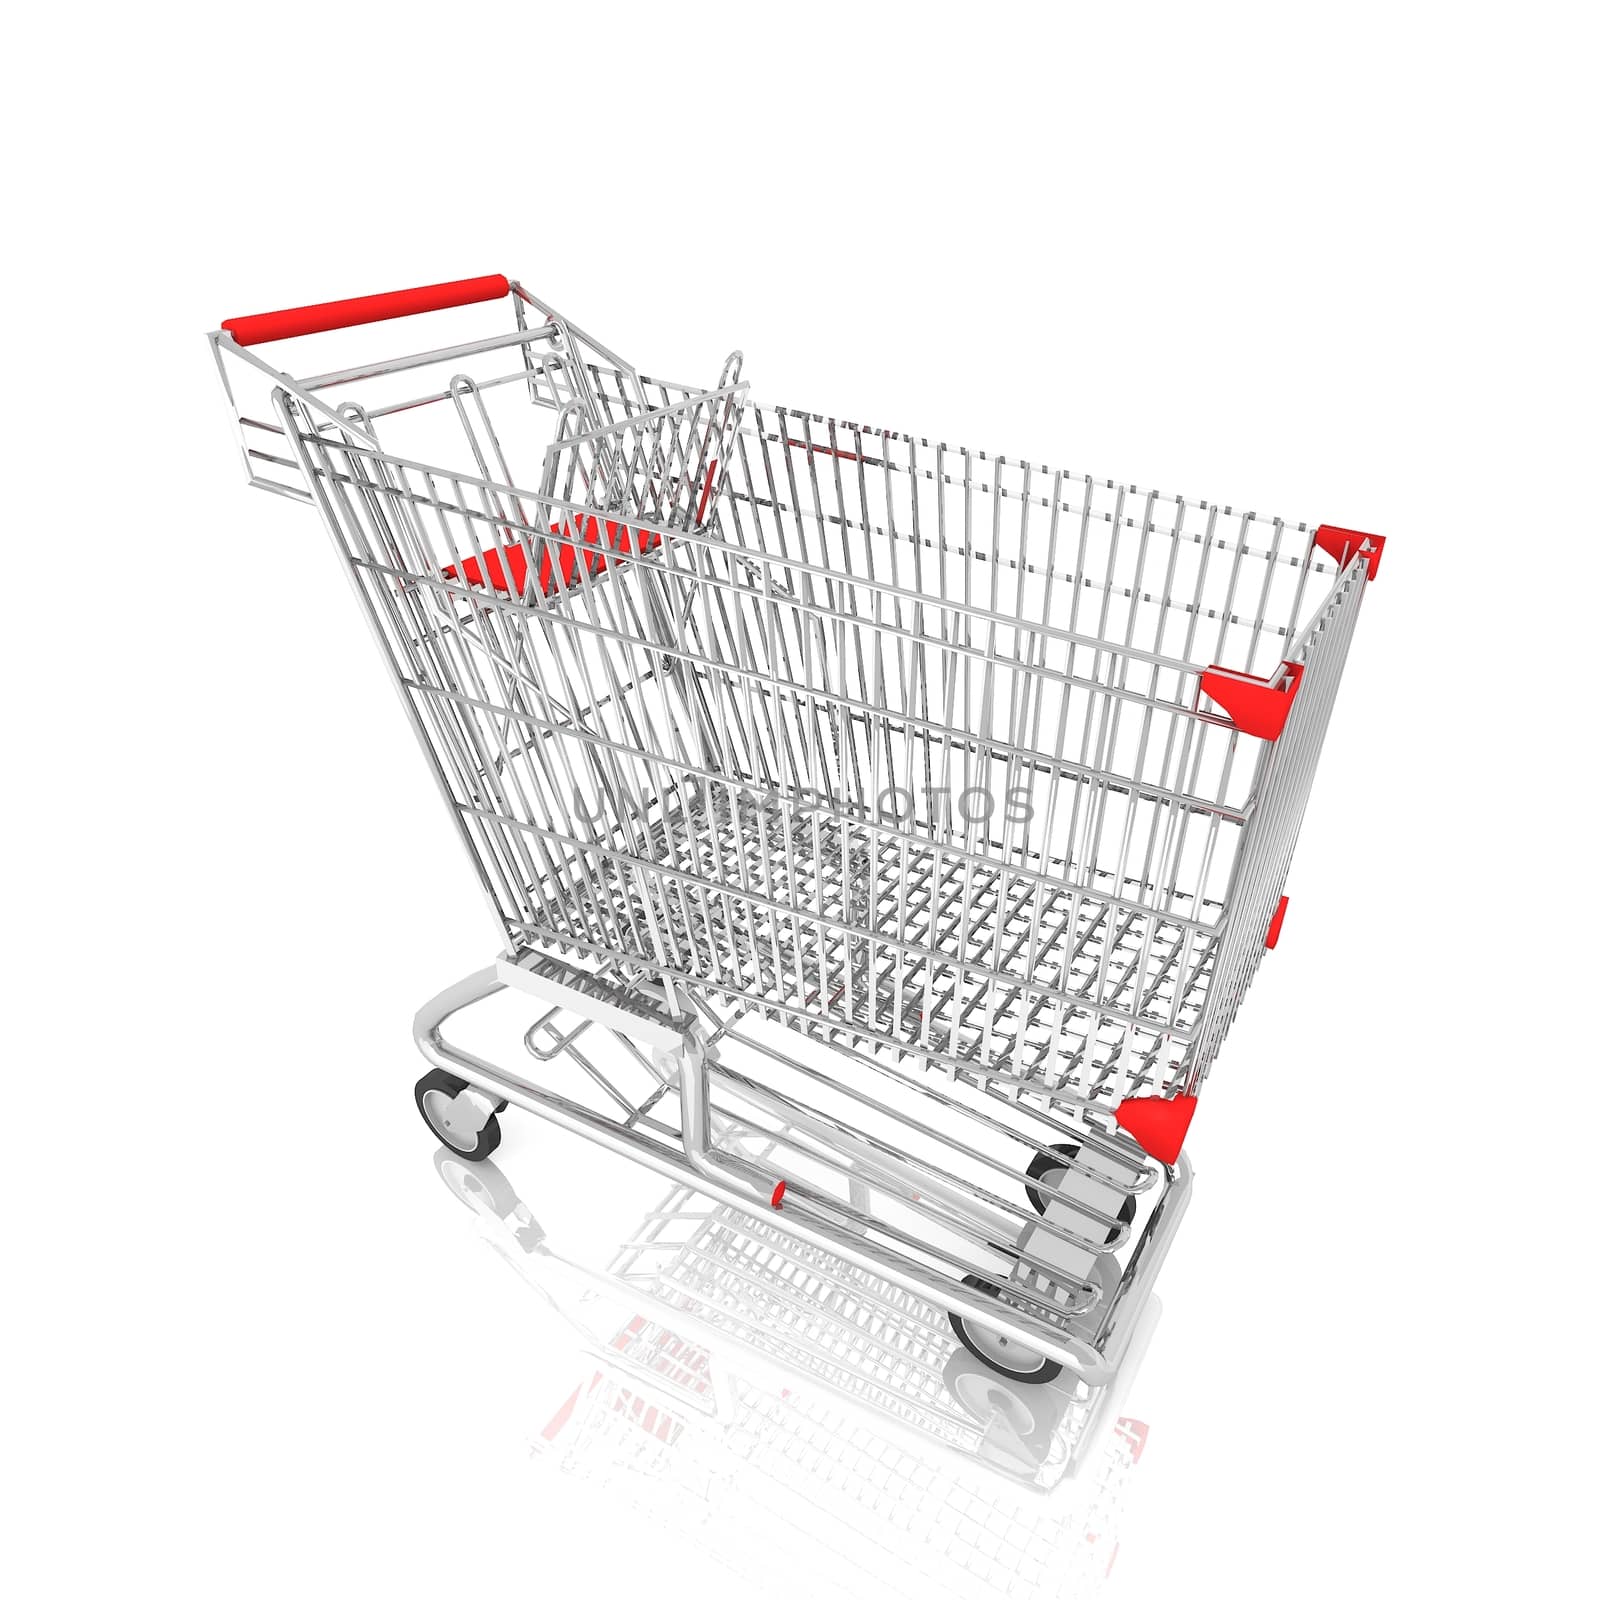 Shopping cart isolated on white,3d rendering